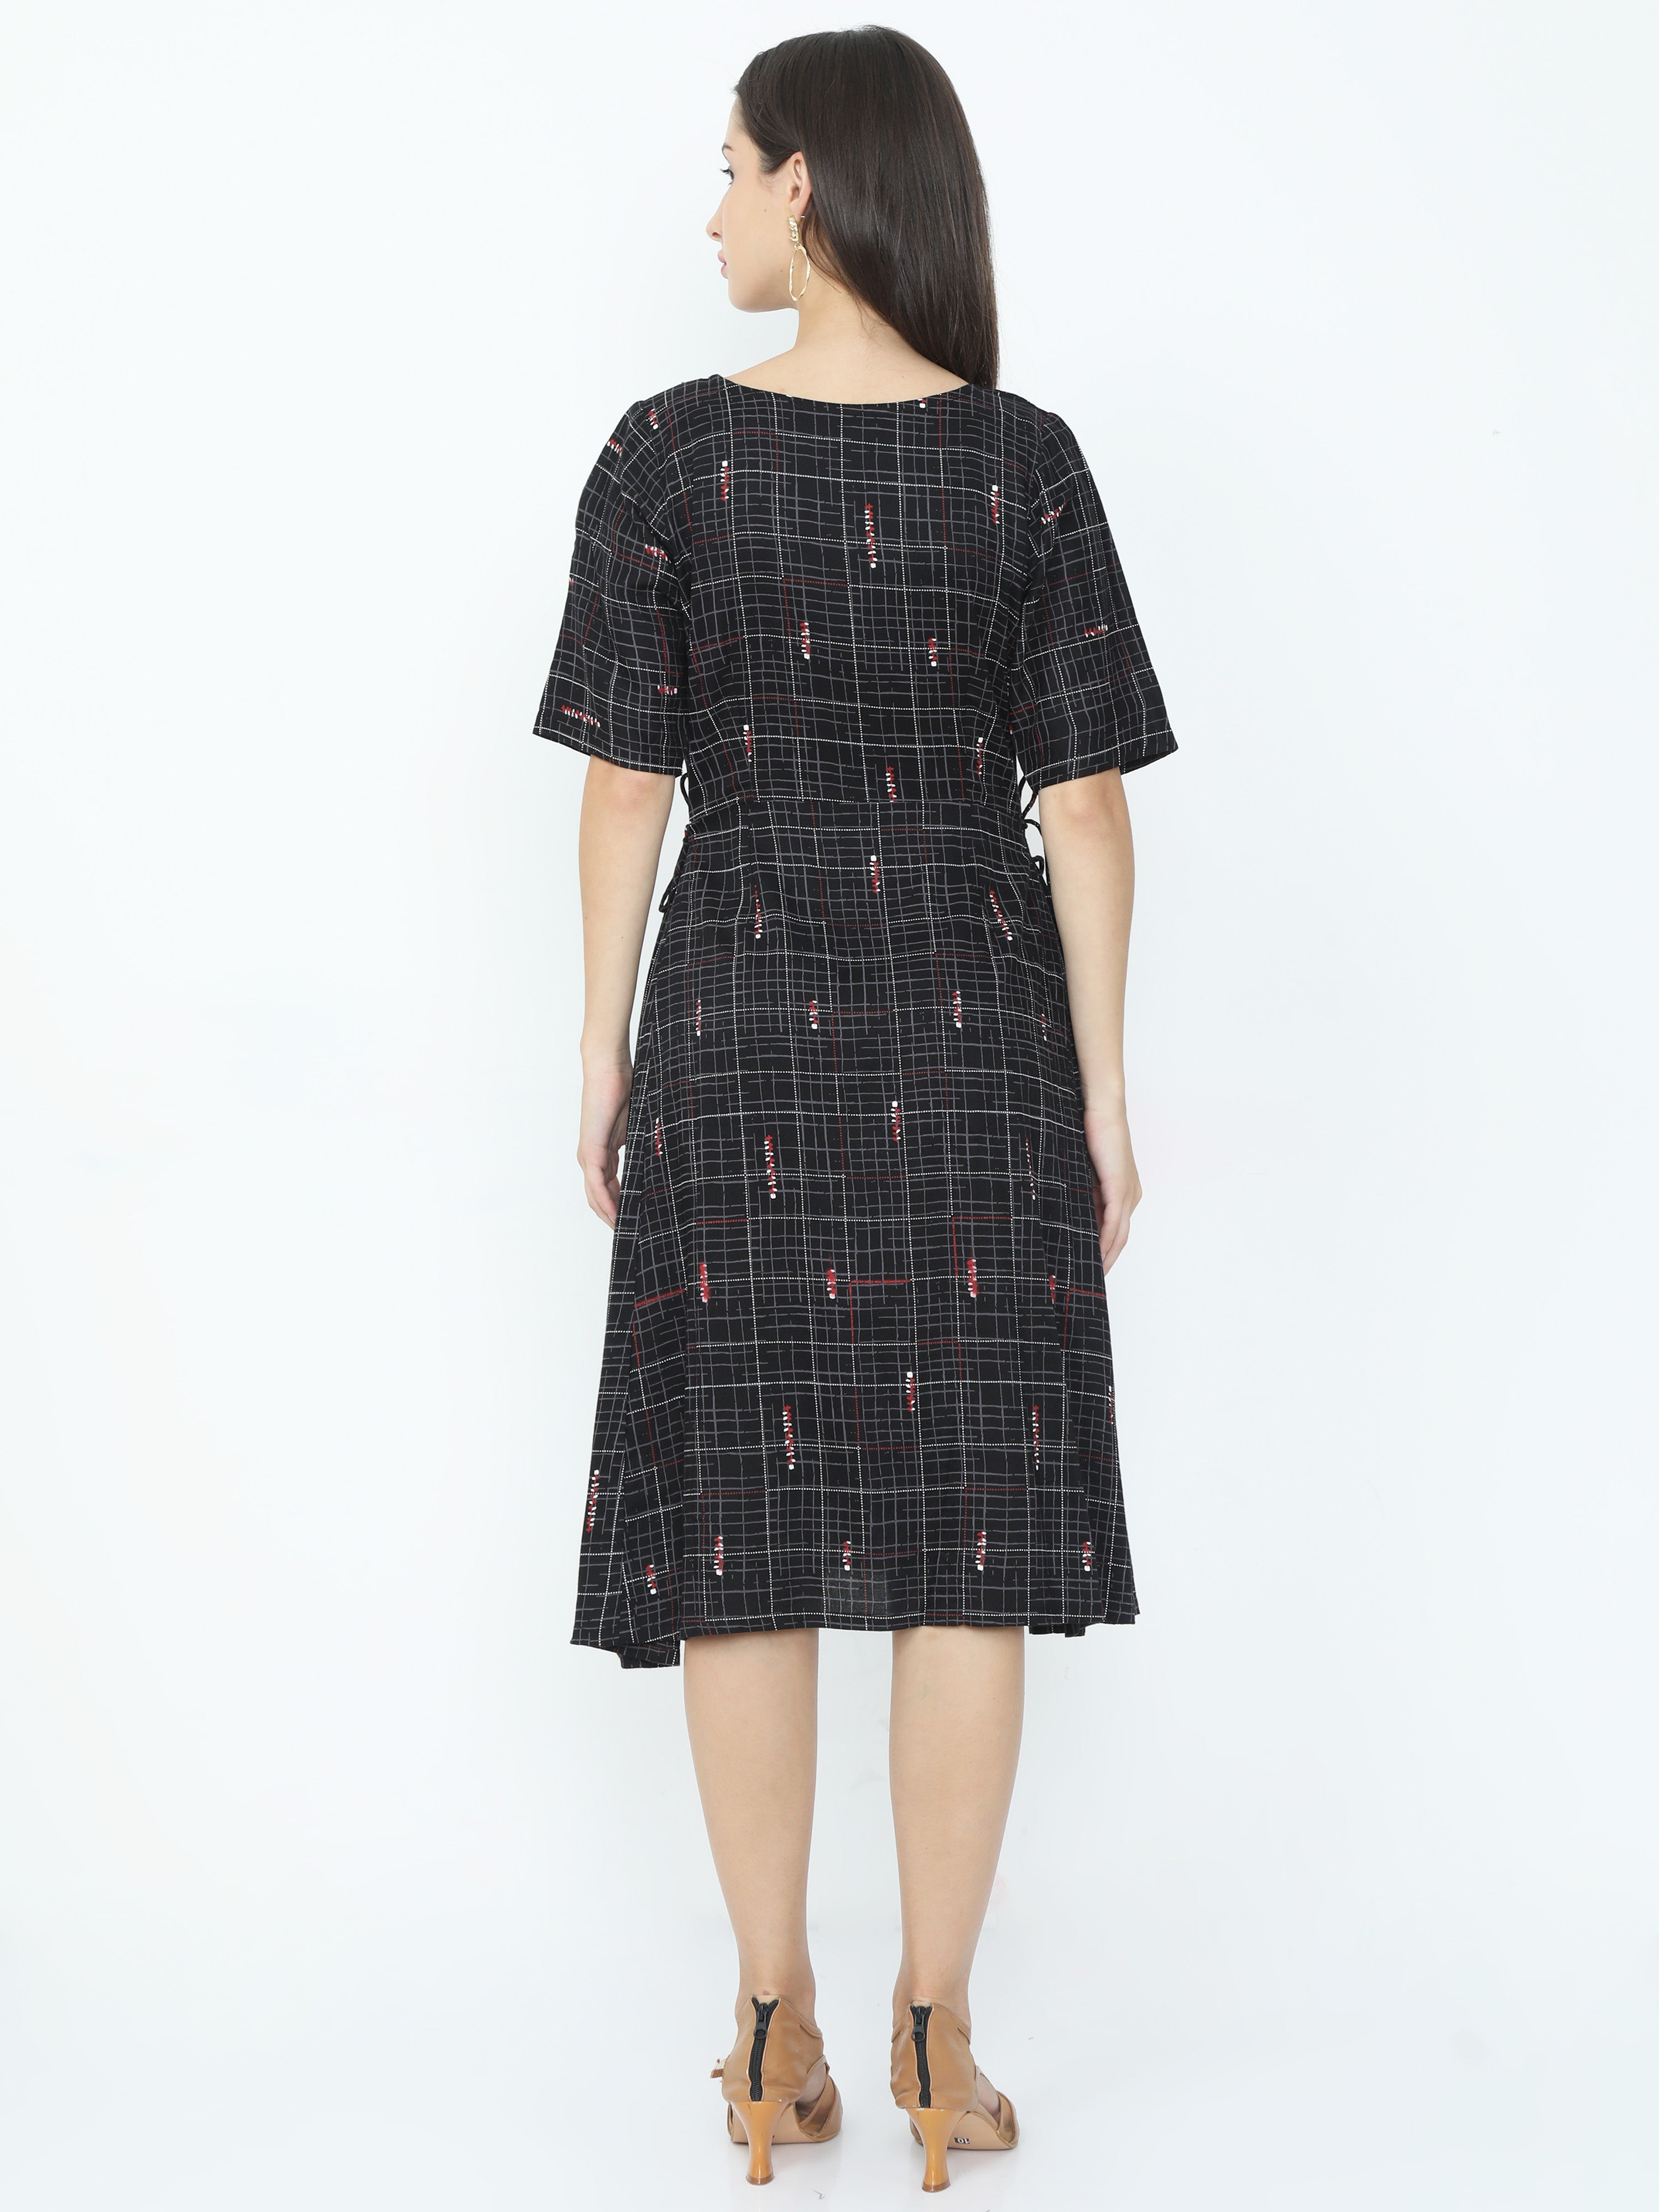 Conversational Printed Boat Neck with Lapel Button and Side Adjustable Gather A-line Dress